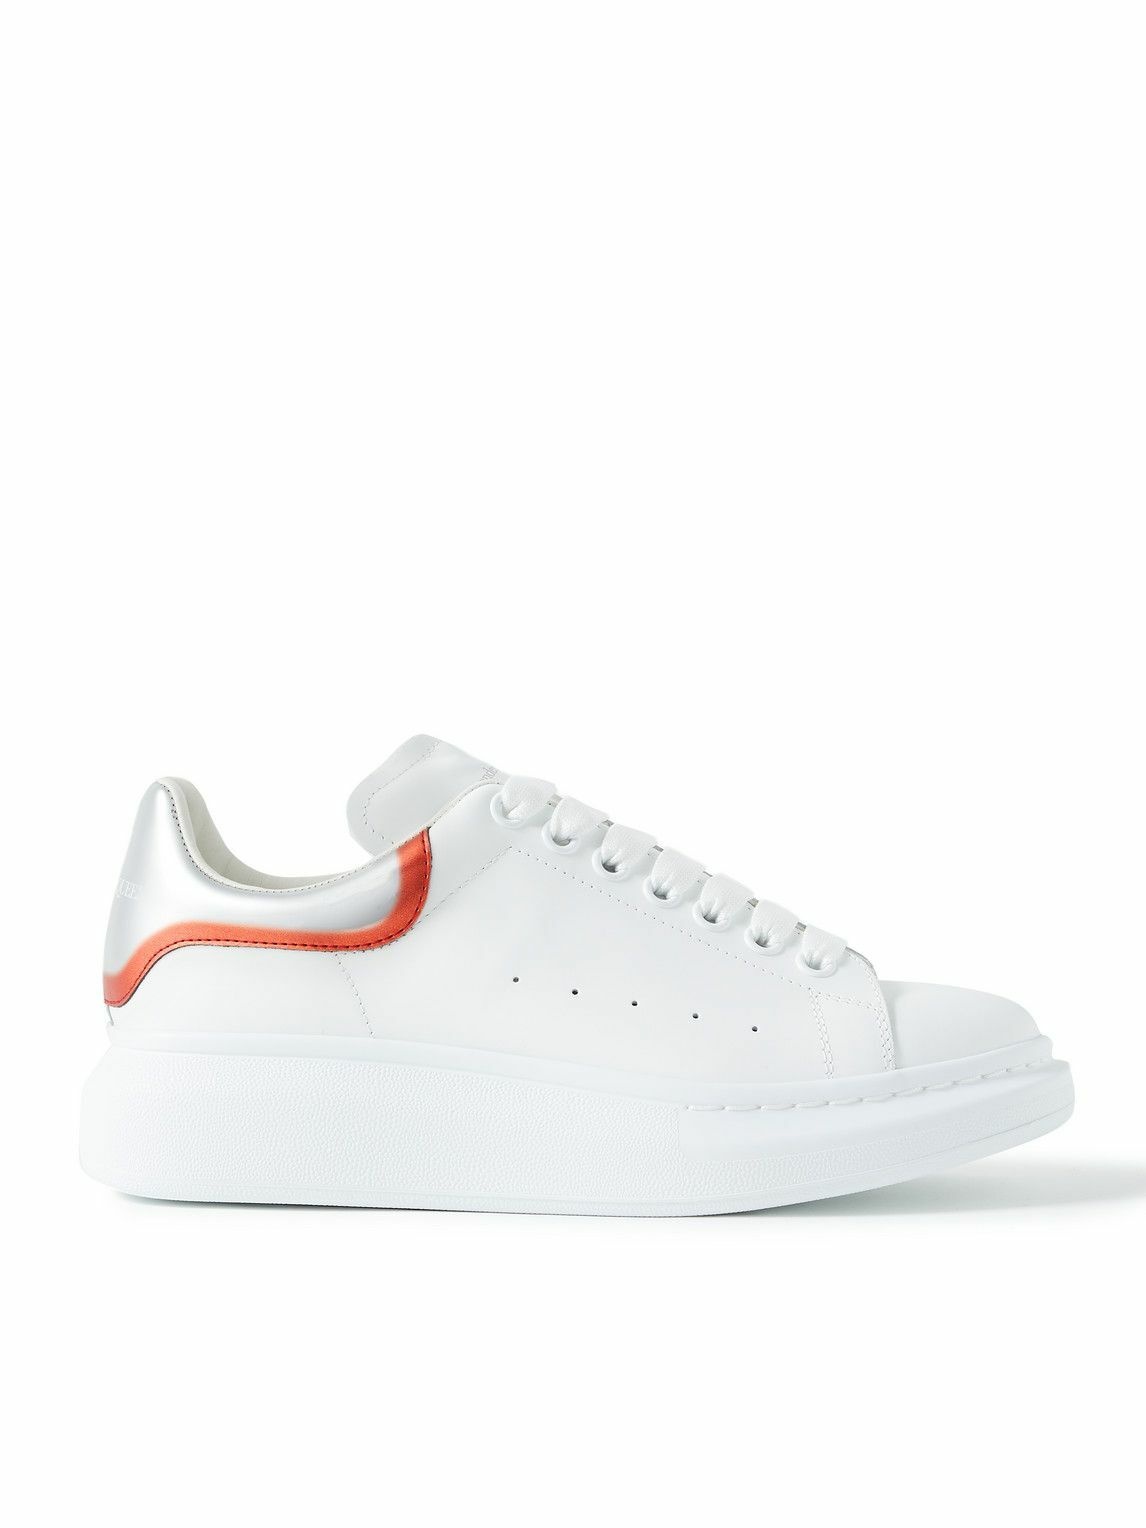 Alexander McQueen - Exaggerated-Sole Leather Sneakers - White Alexander ...